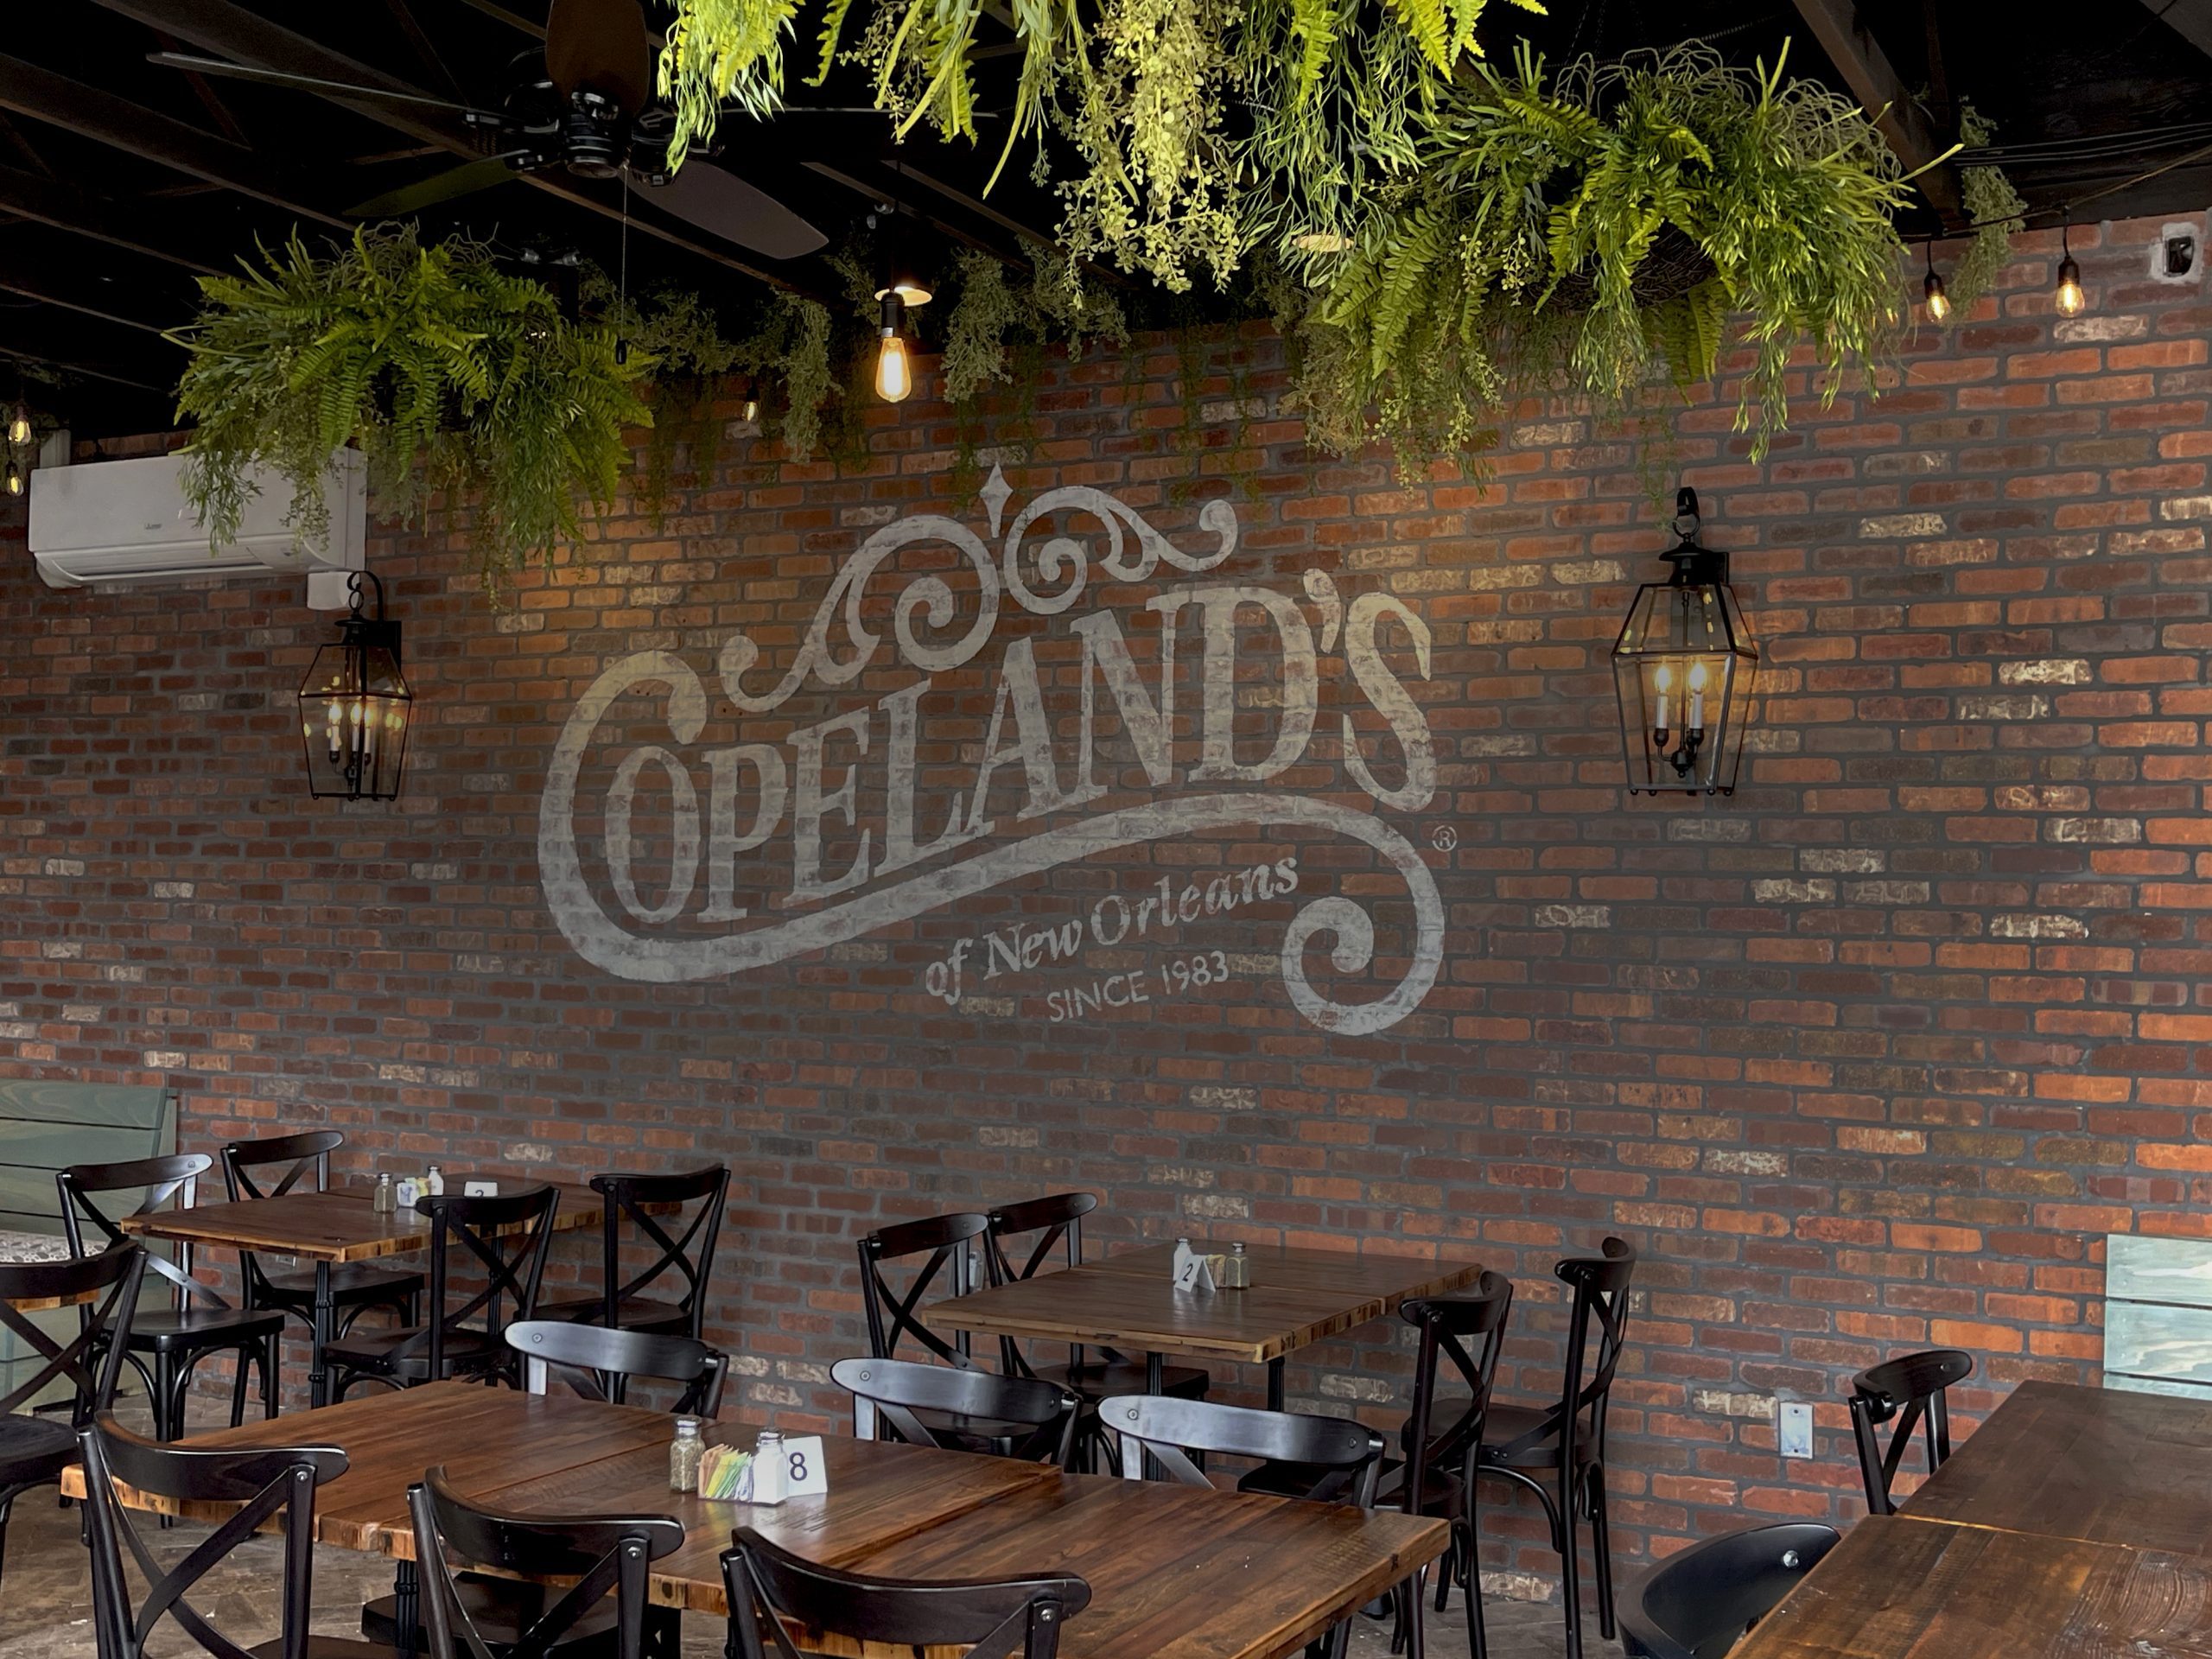 Copeland's of New Orleans Brown Wall